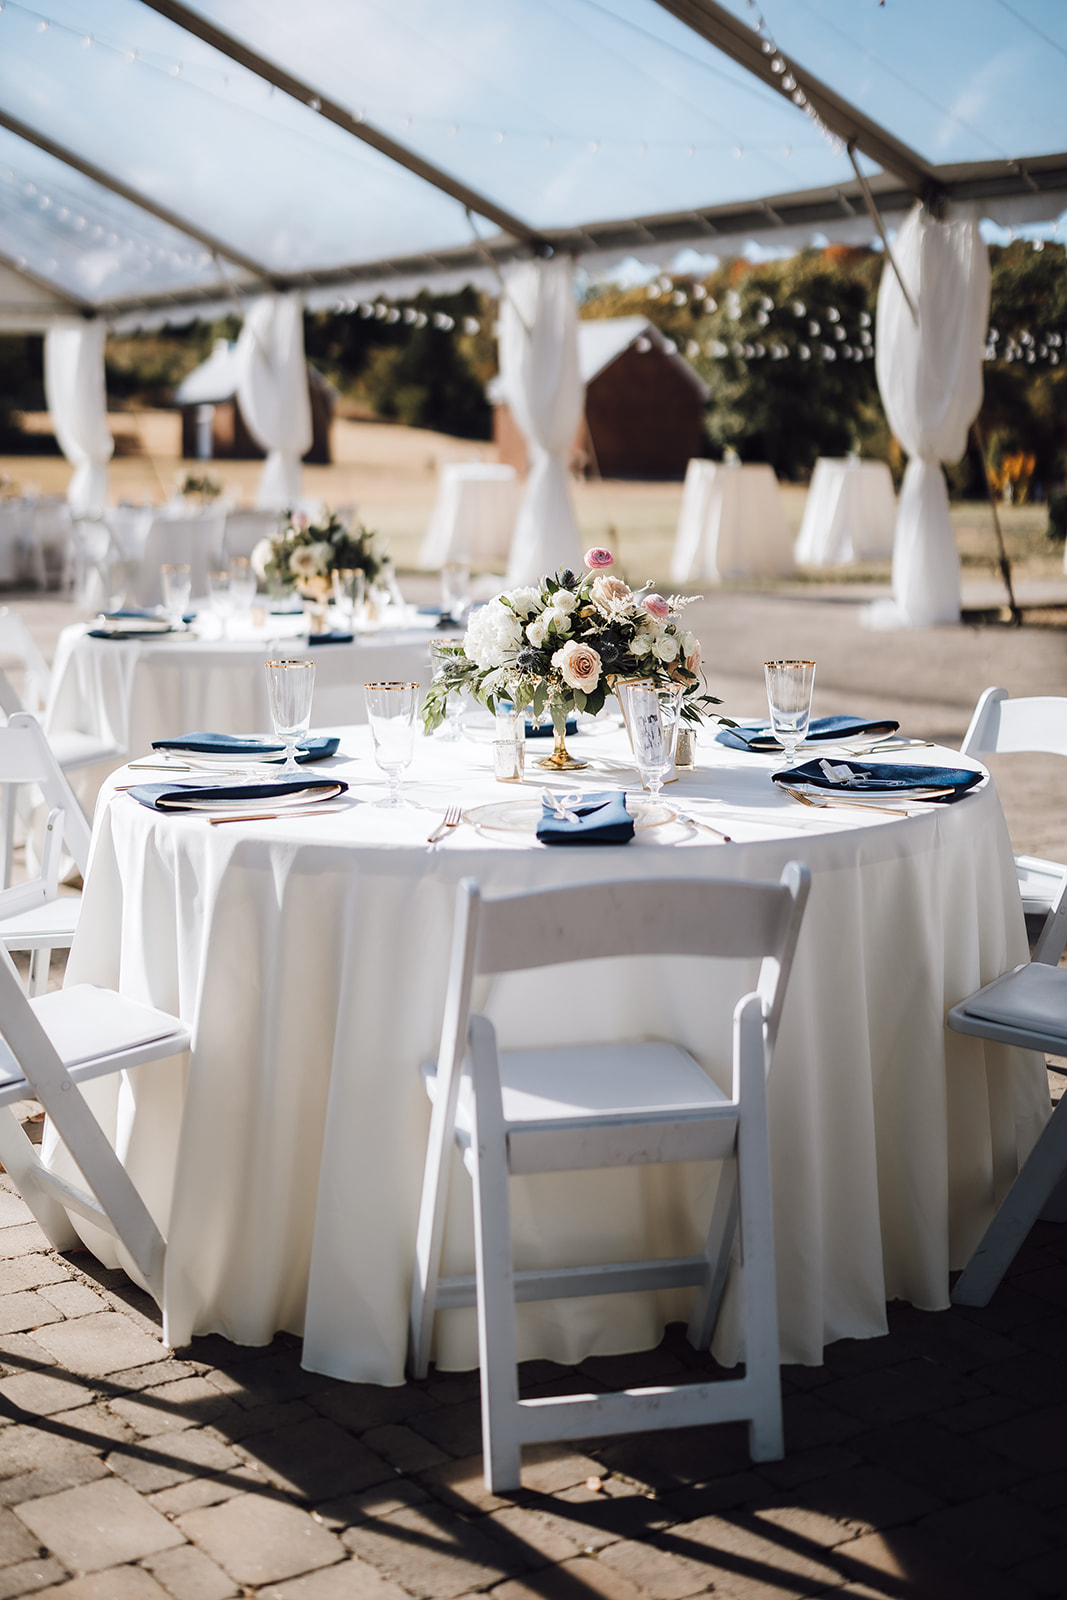 A wedding reception table with white linens and blue napkins and gold-rimmed glasses Ravenswood Mansion